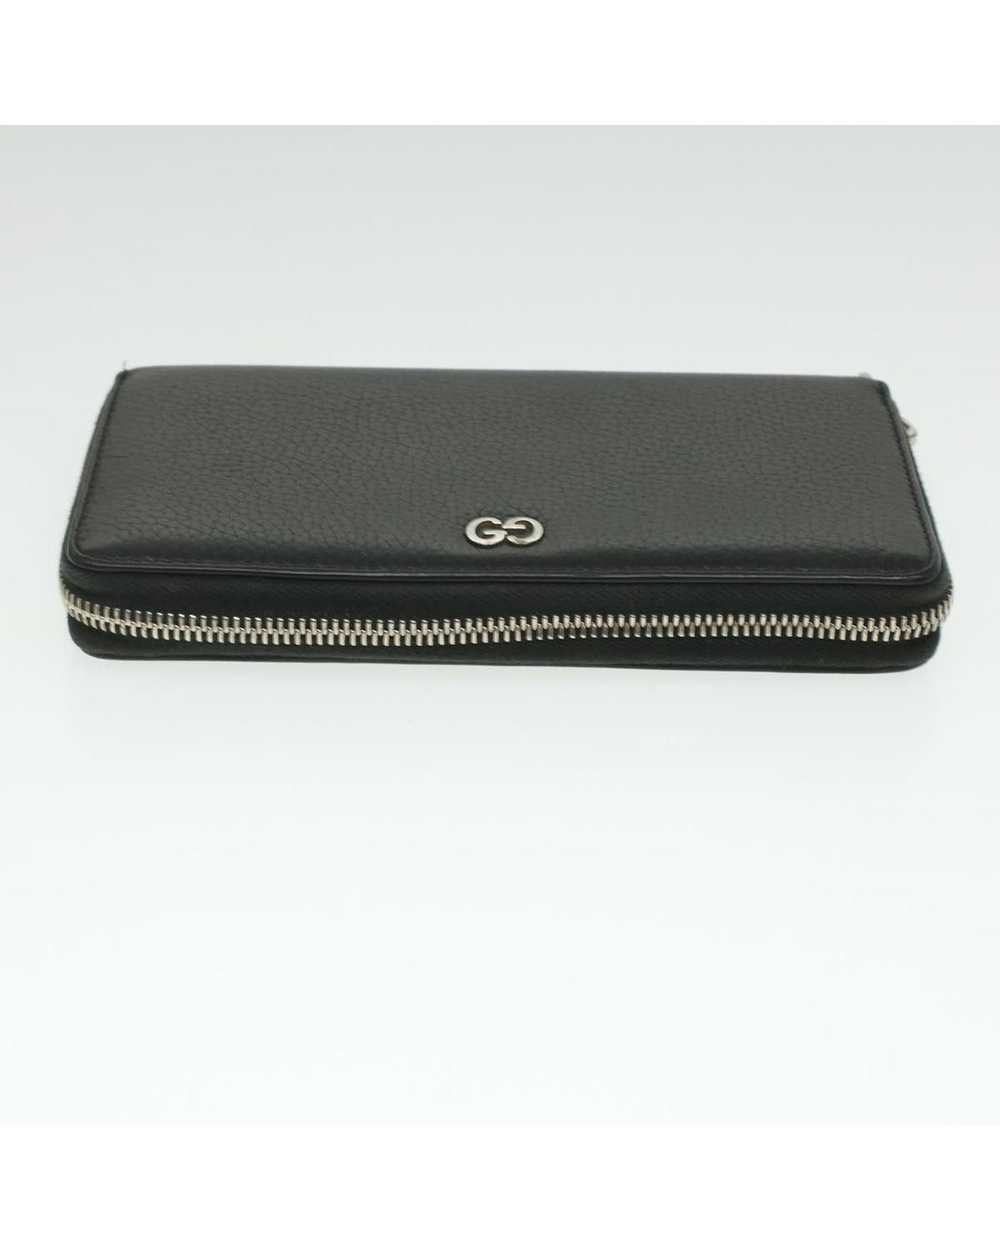 Gucci Black Leather Long Wallet by Gucci 473928 - image 6